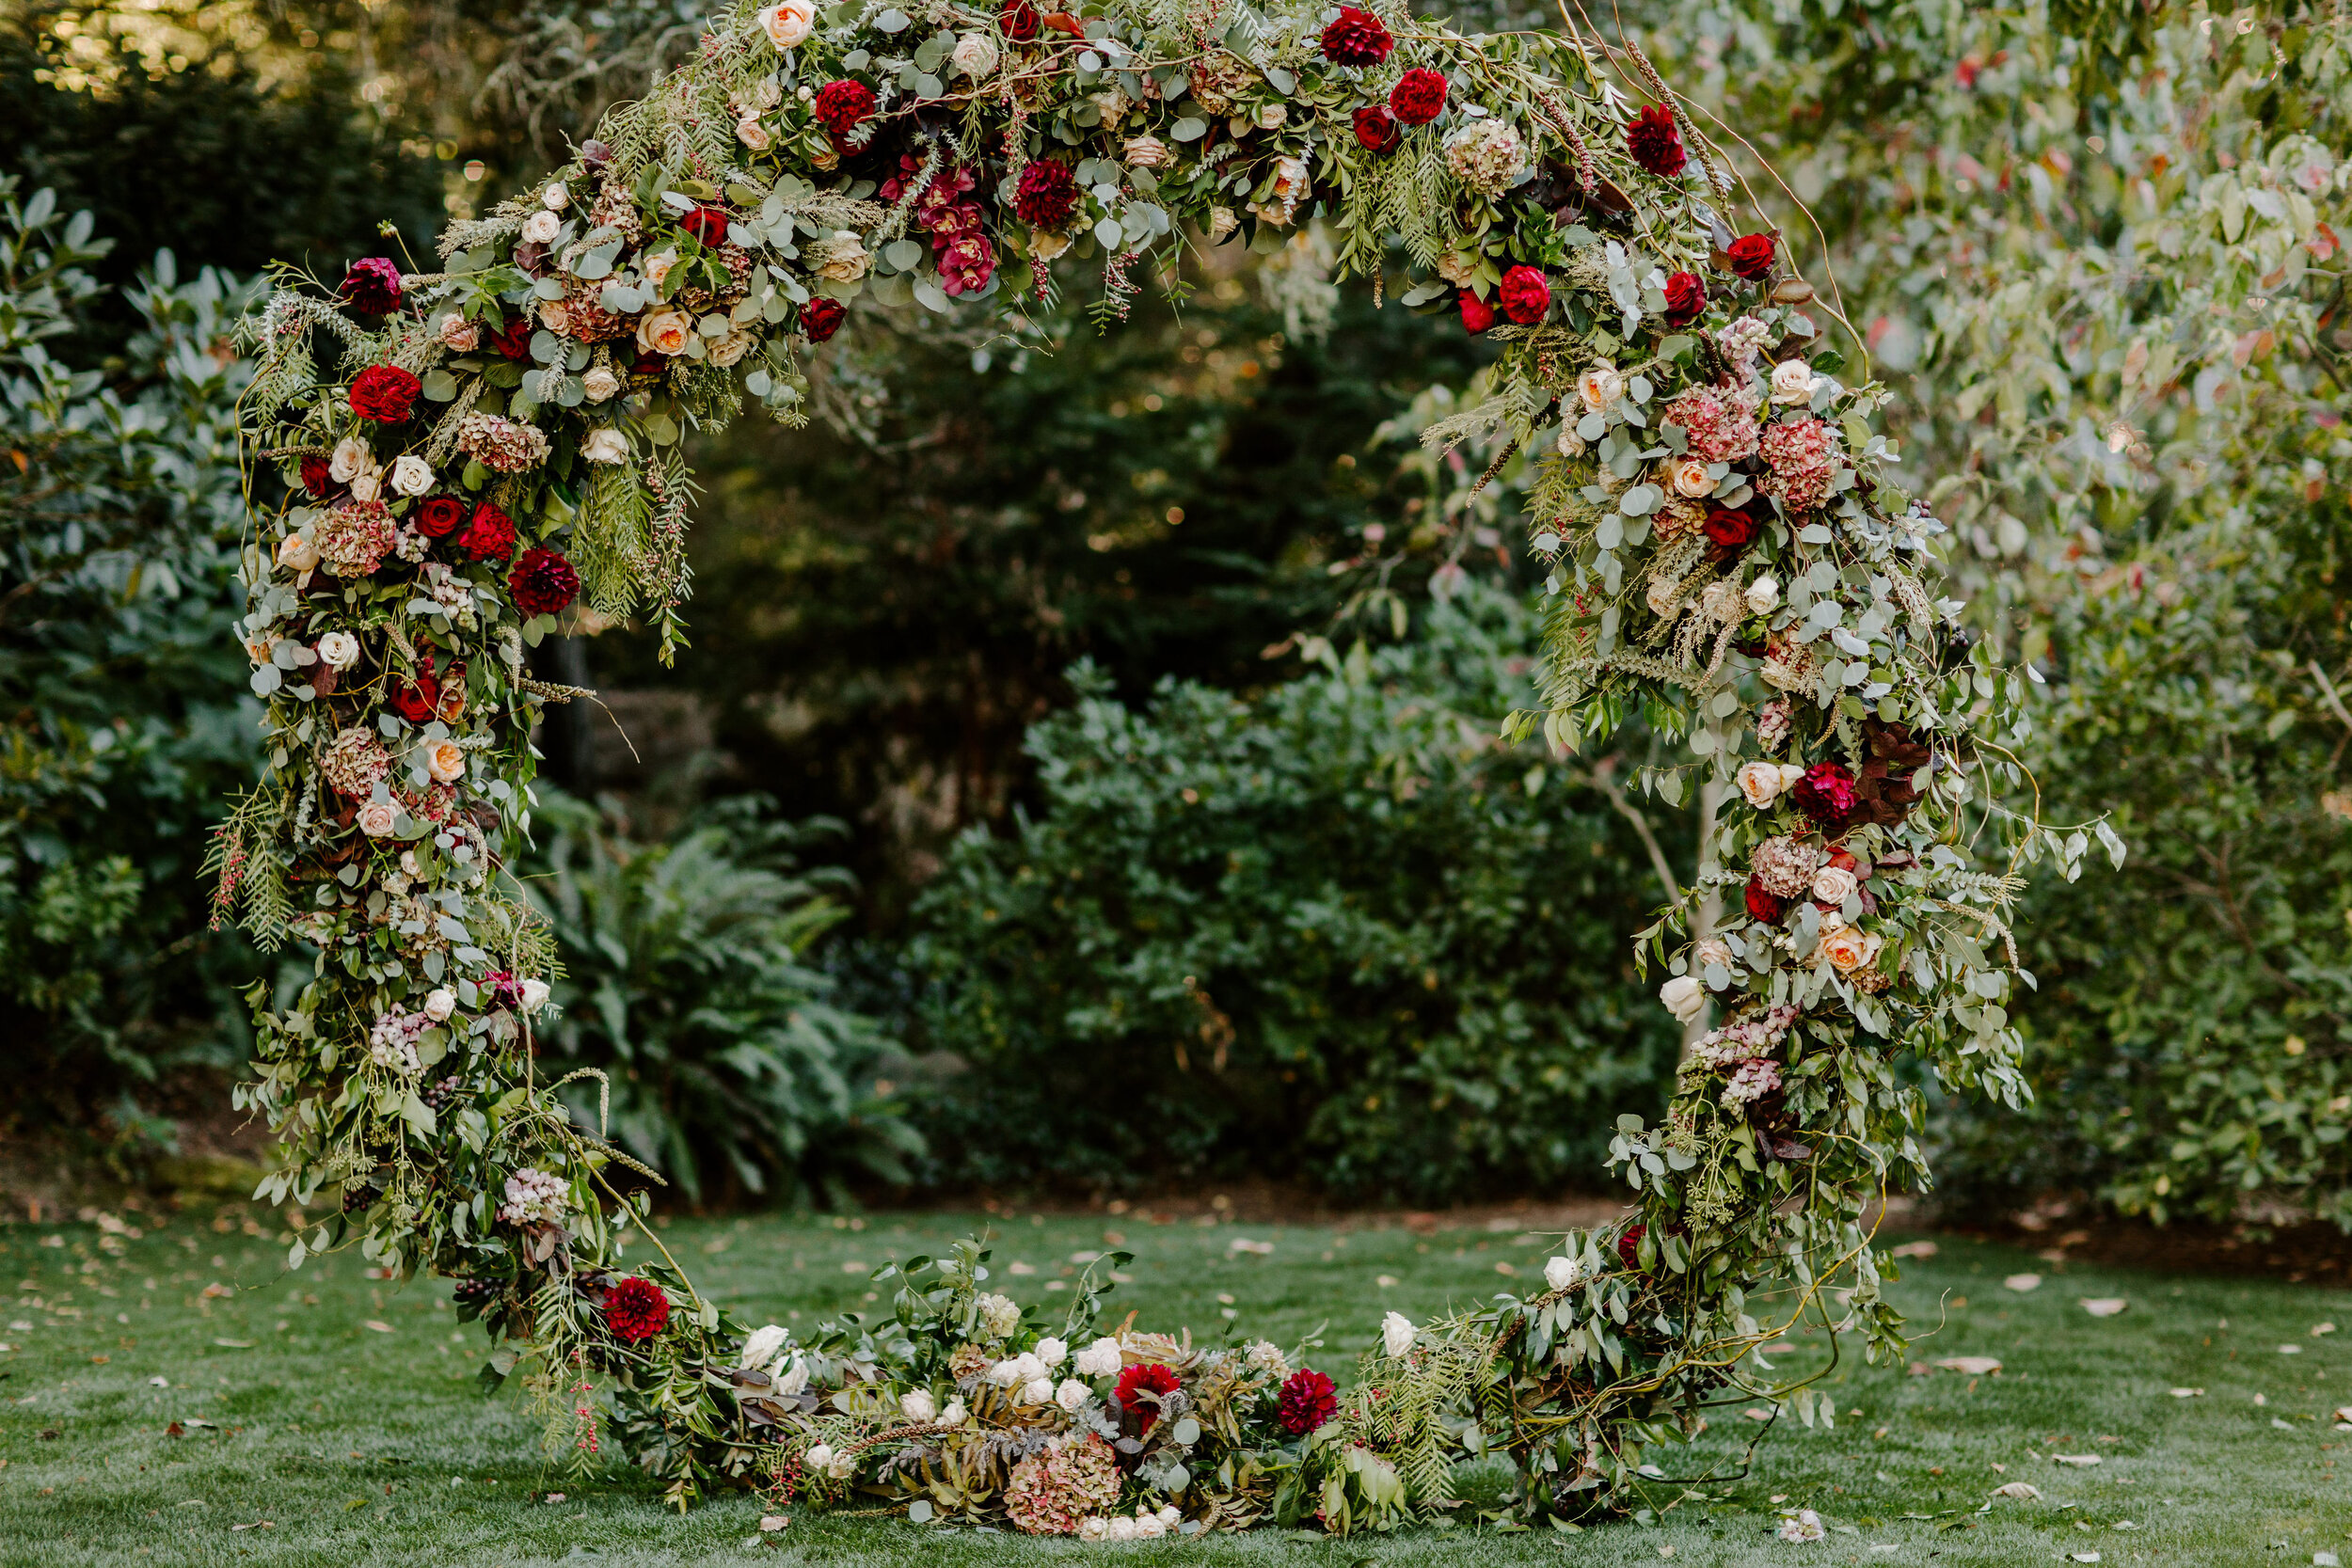 Fall Wedding Altar Ideas Featured in Town & Country Magazine3.jpg